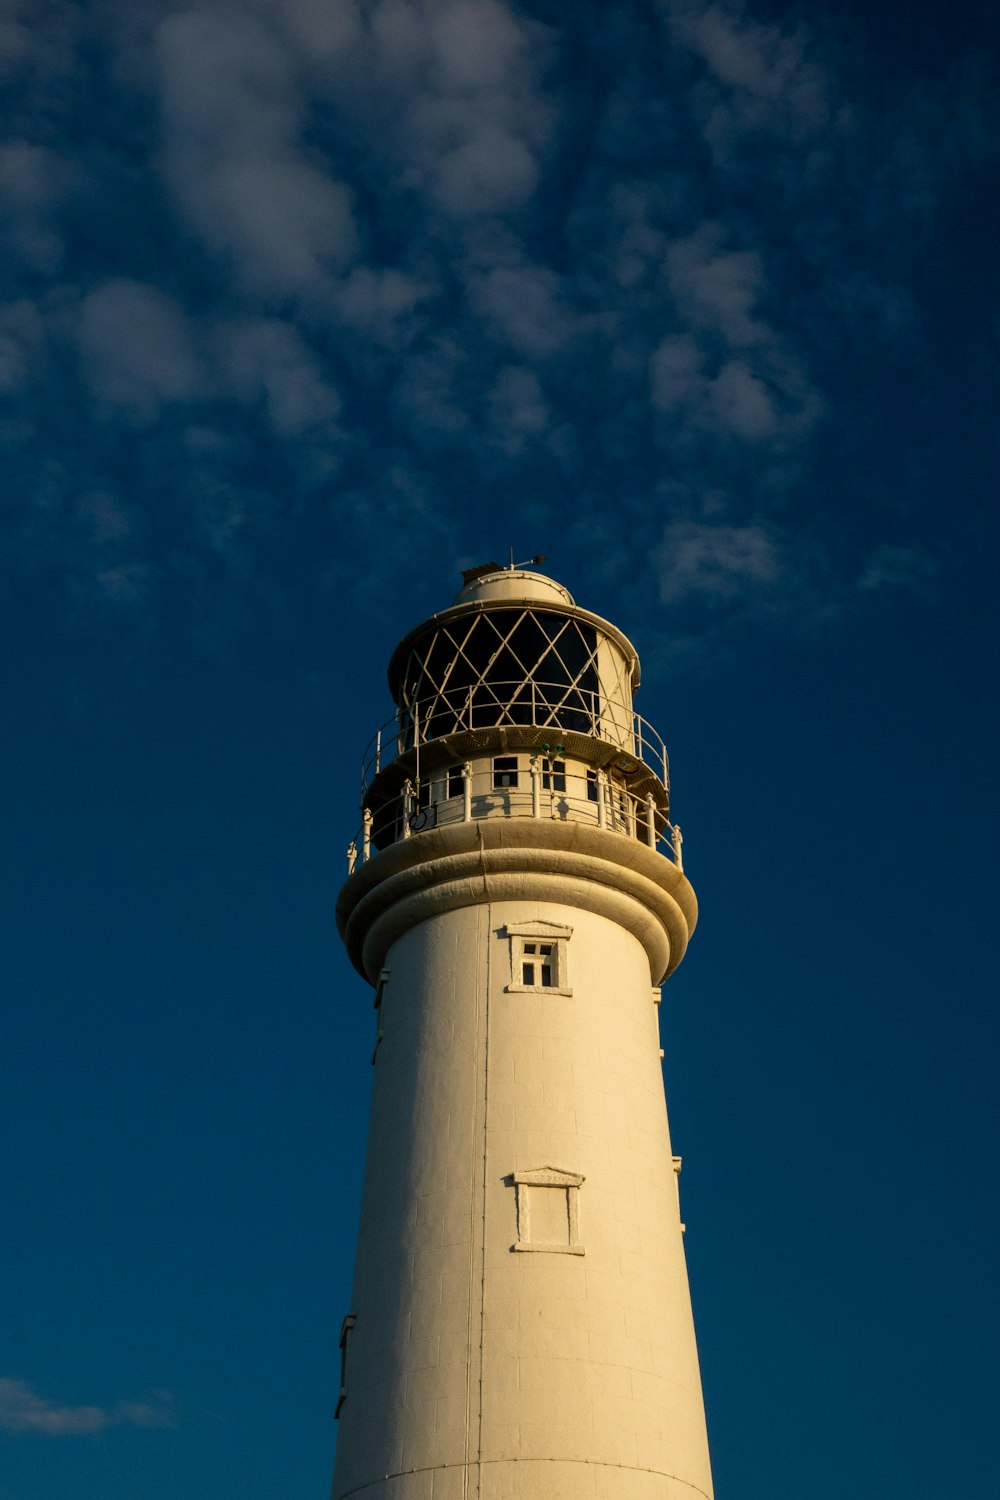 a white lighthouse with a blue sky in the background